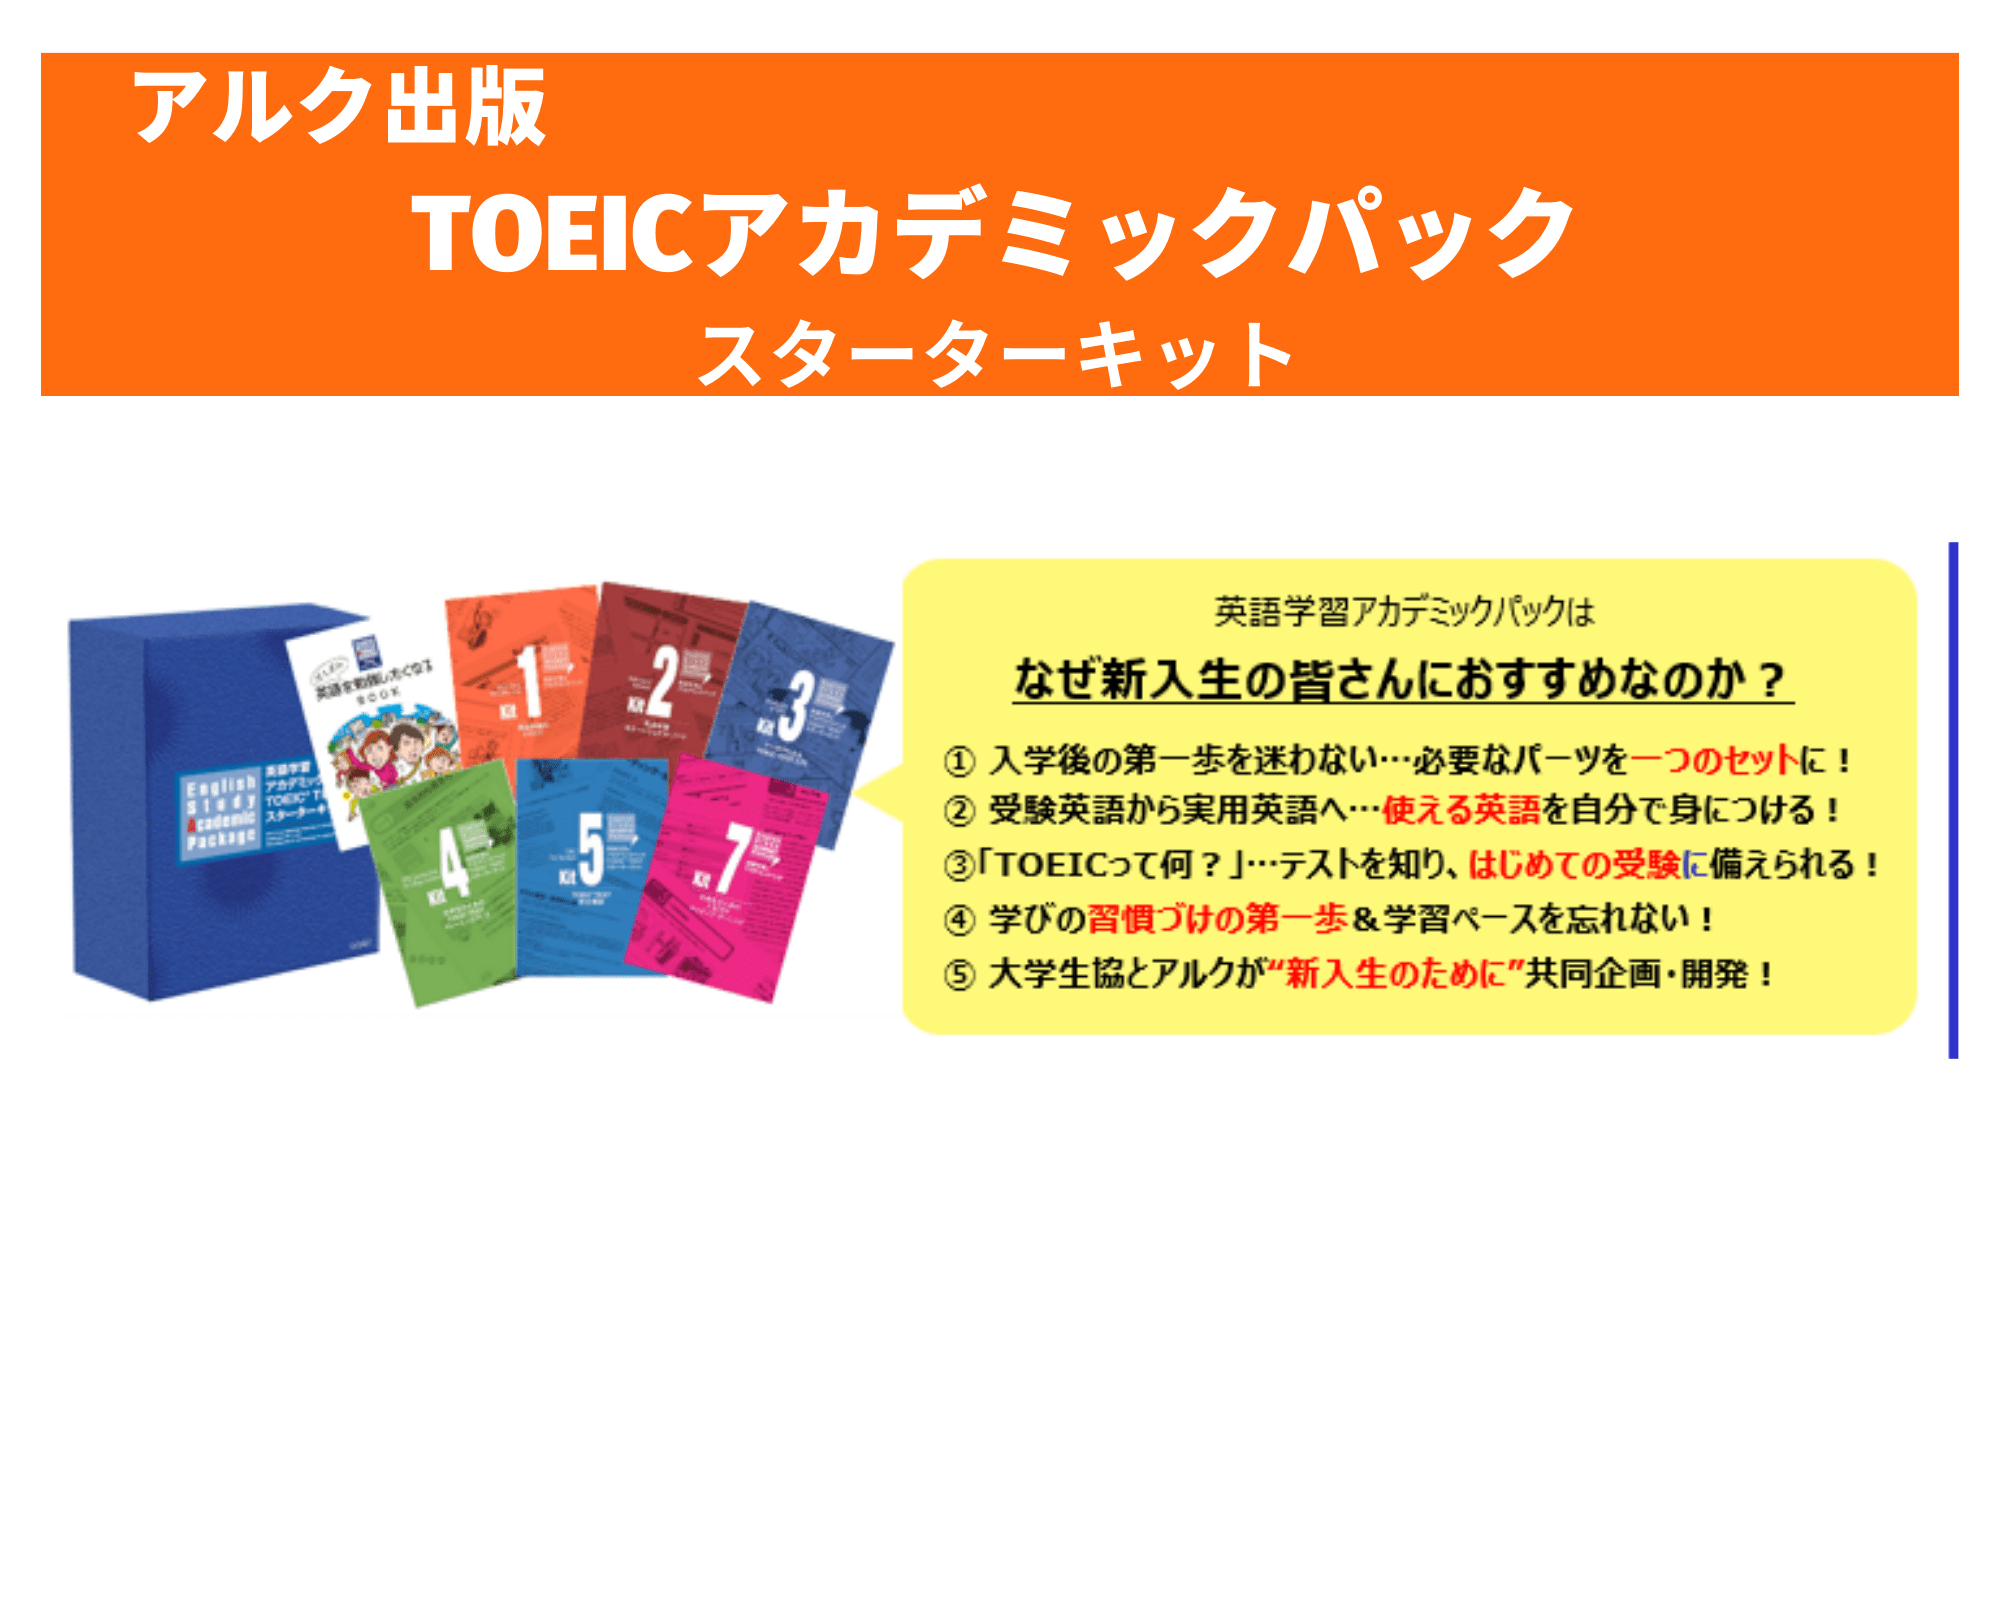 TOEICスターターキット - 語学・辞書・学習参考書